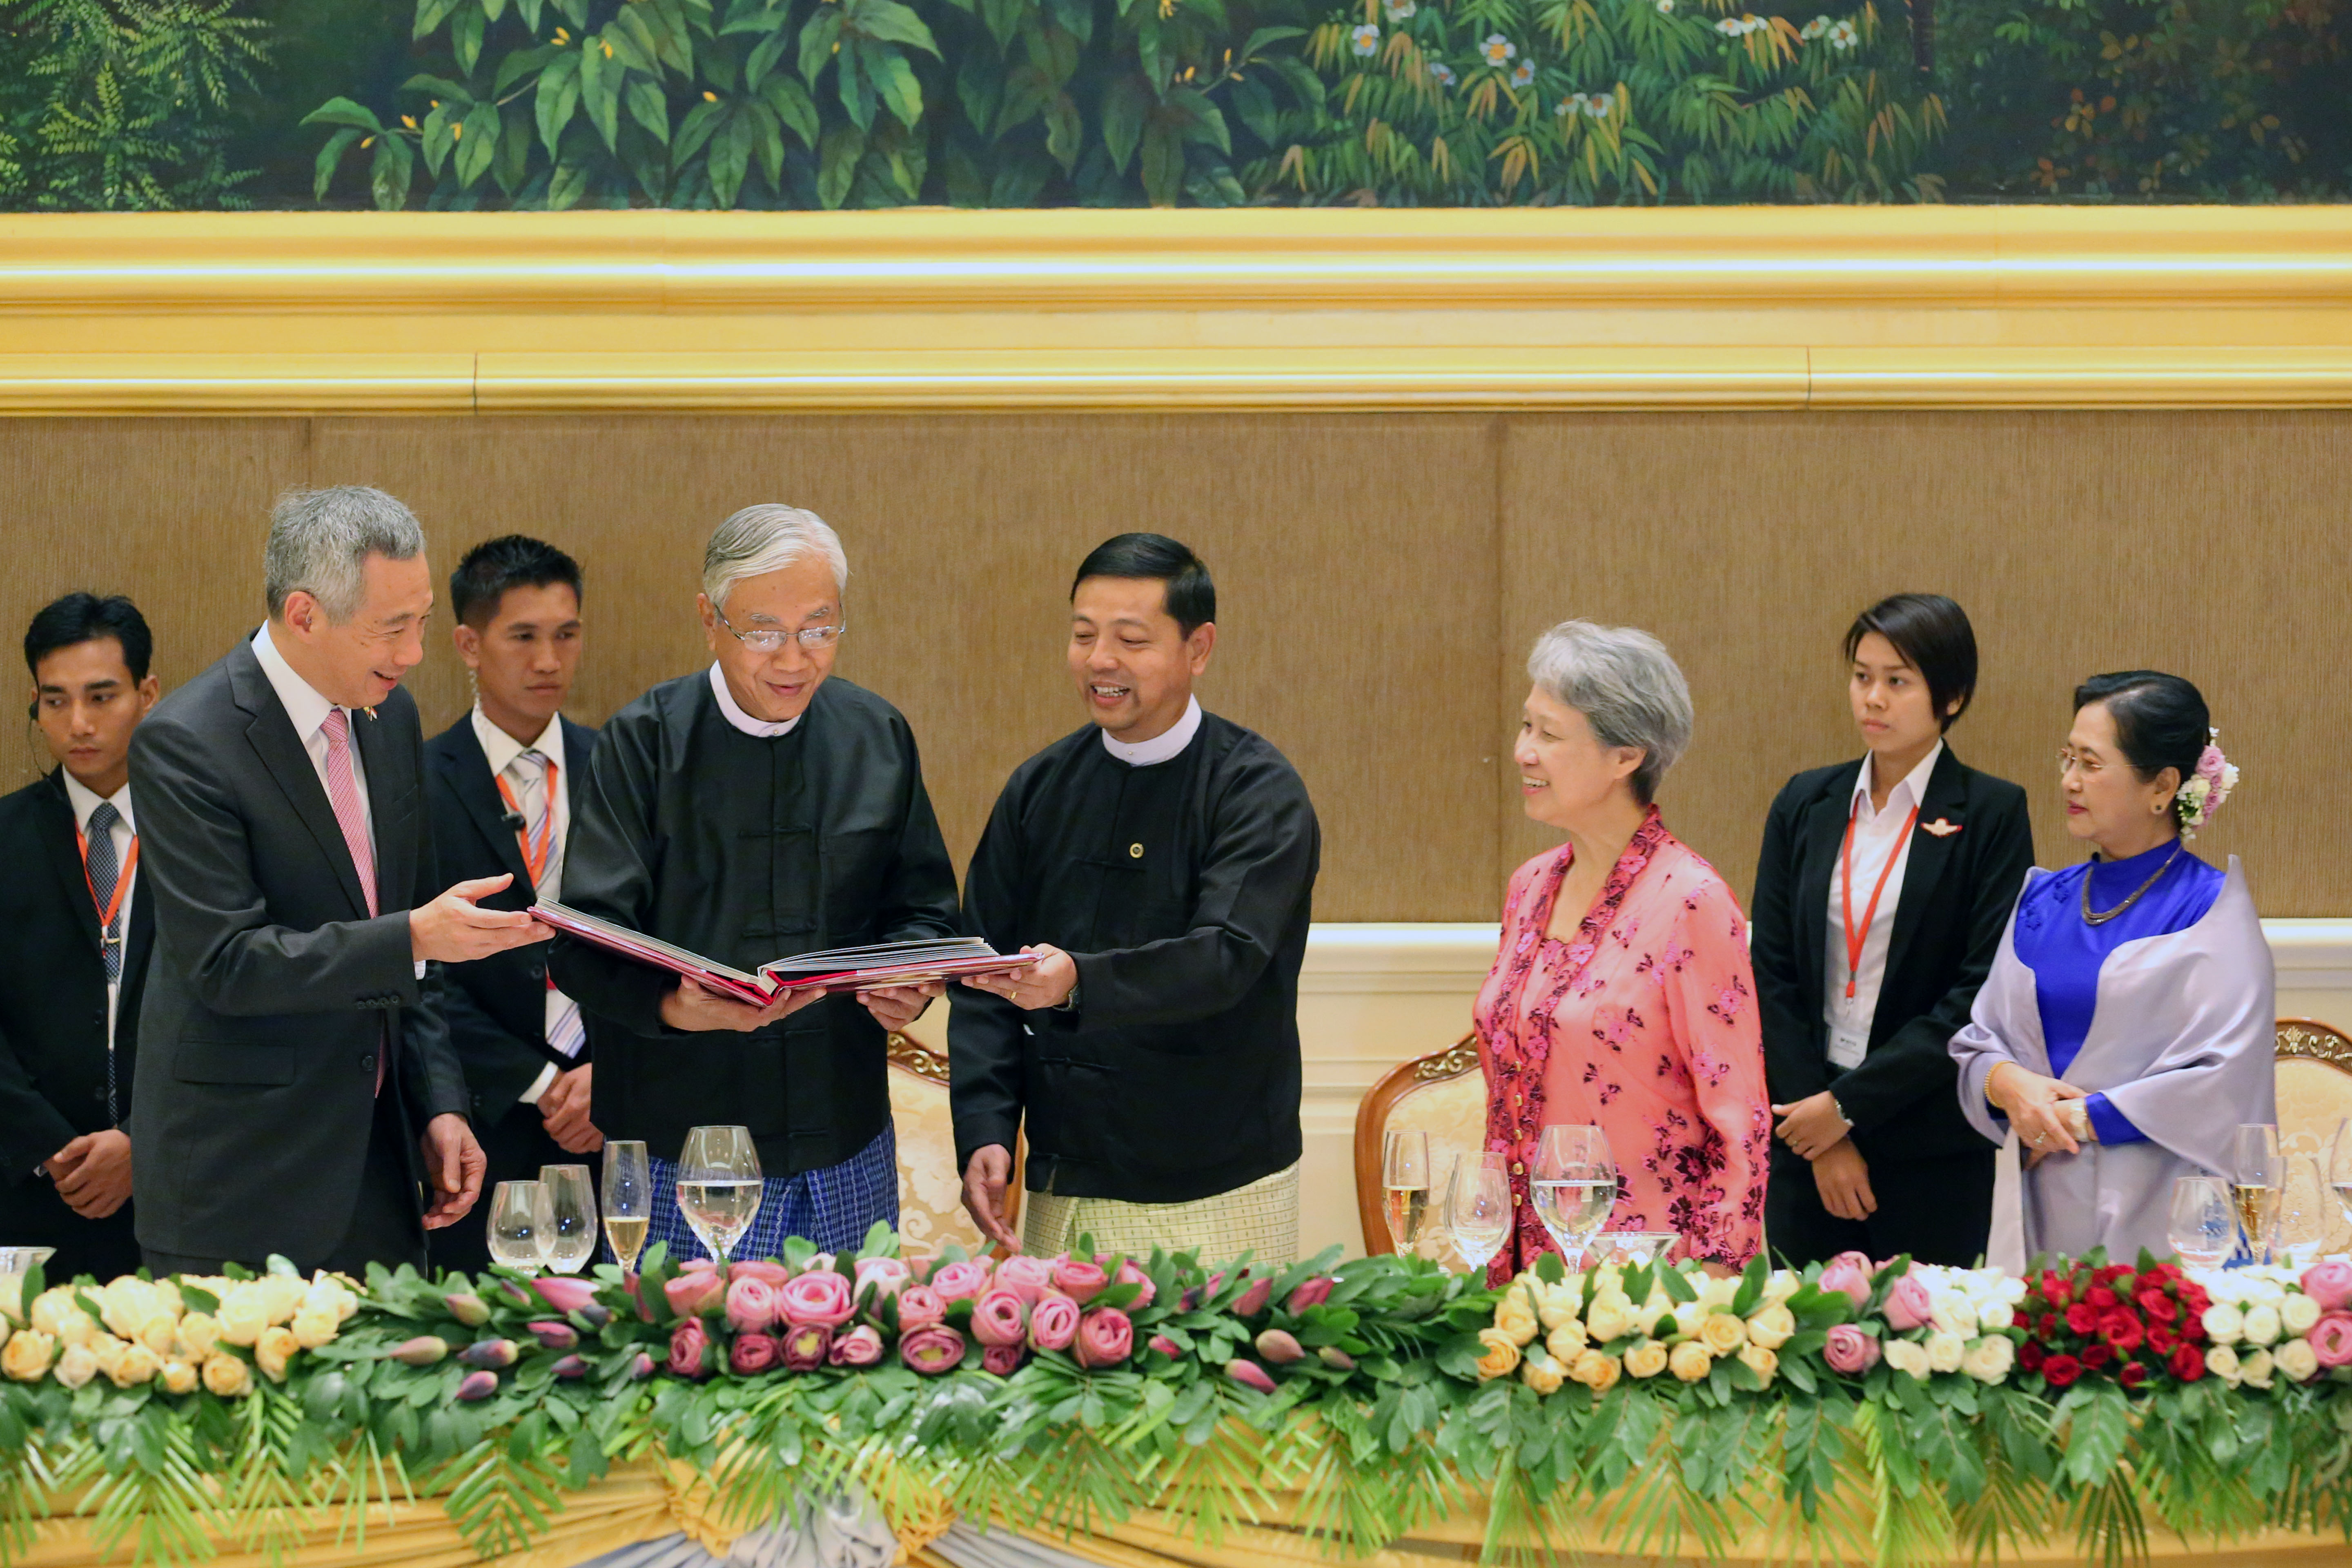 PM Lee Hsien Loong at the official dinner hosted by Myanmar President U Htin Kyaw on 7 June 2016 (MCI Photo by Chwee)